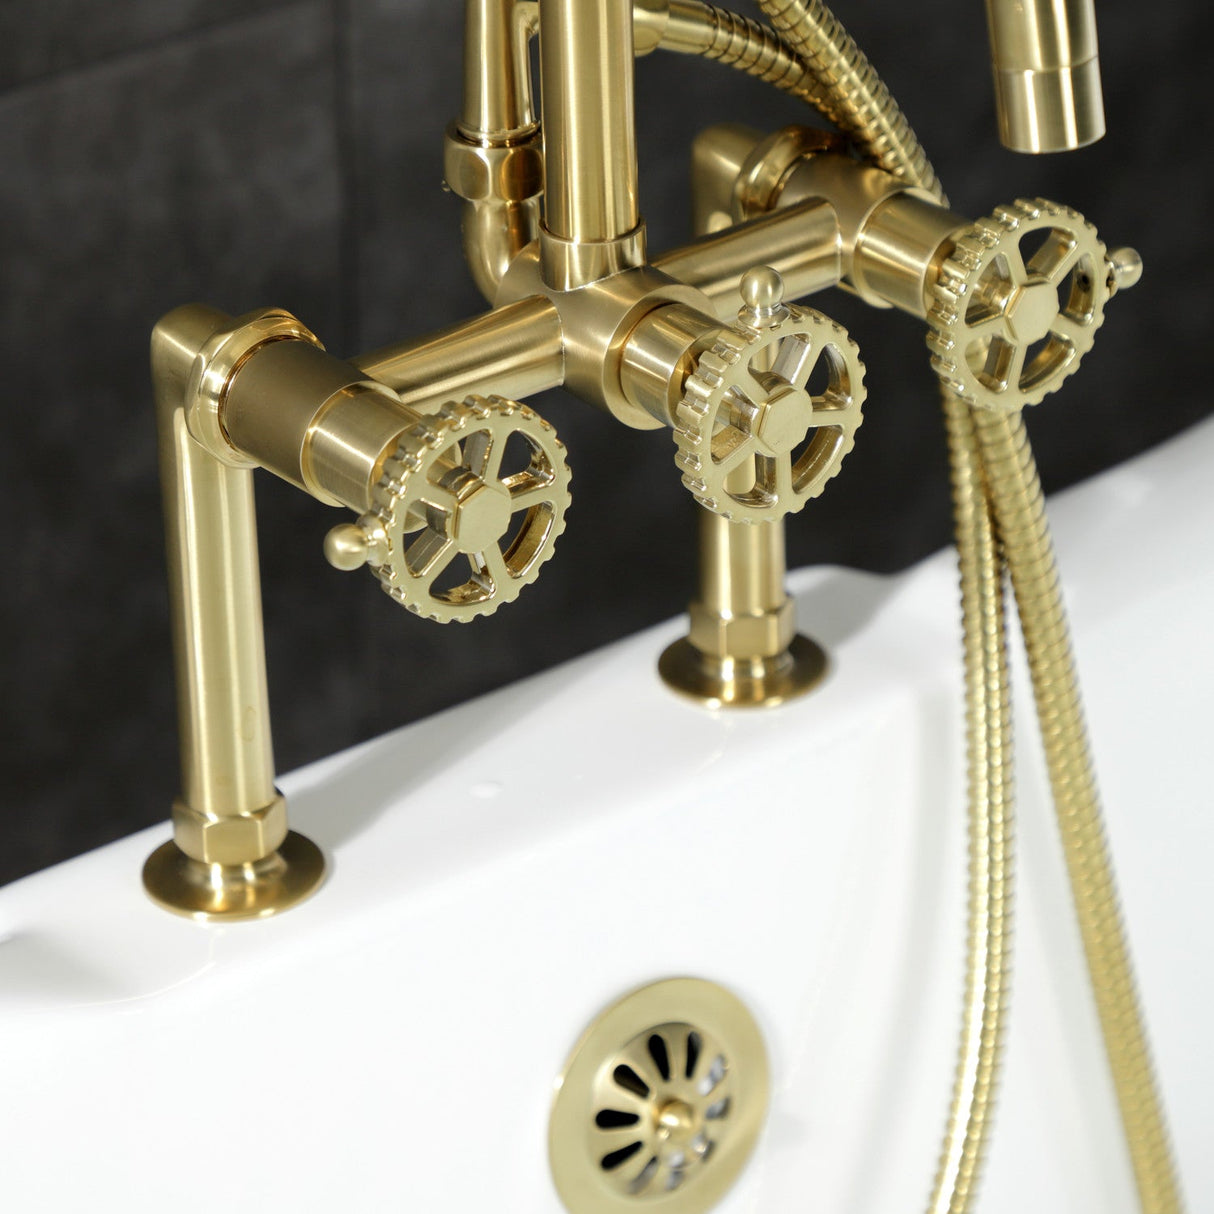 Fuller AE8407CG Three-Handle 2-Hole Deck Mount Clawfoot Tub Faucet with Hand Shower, Brushed Brass